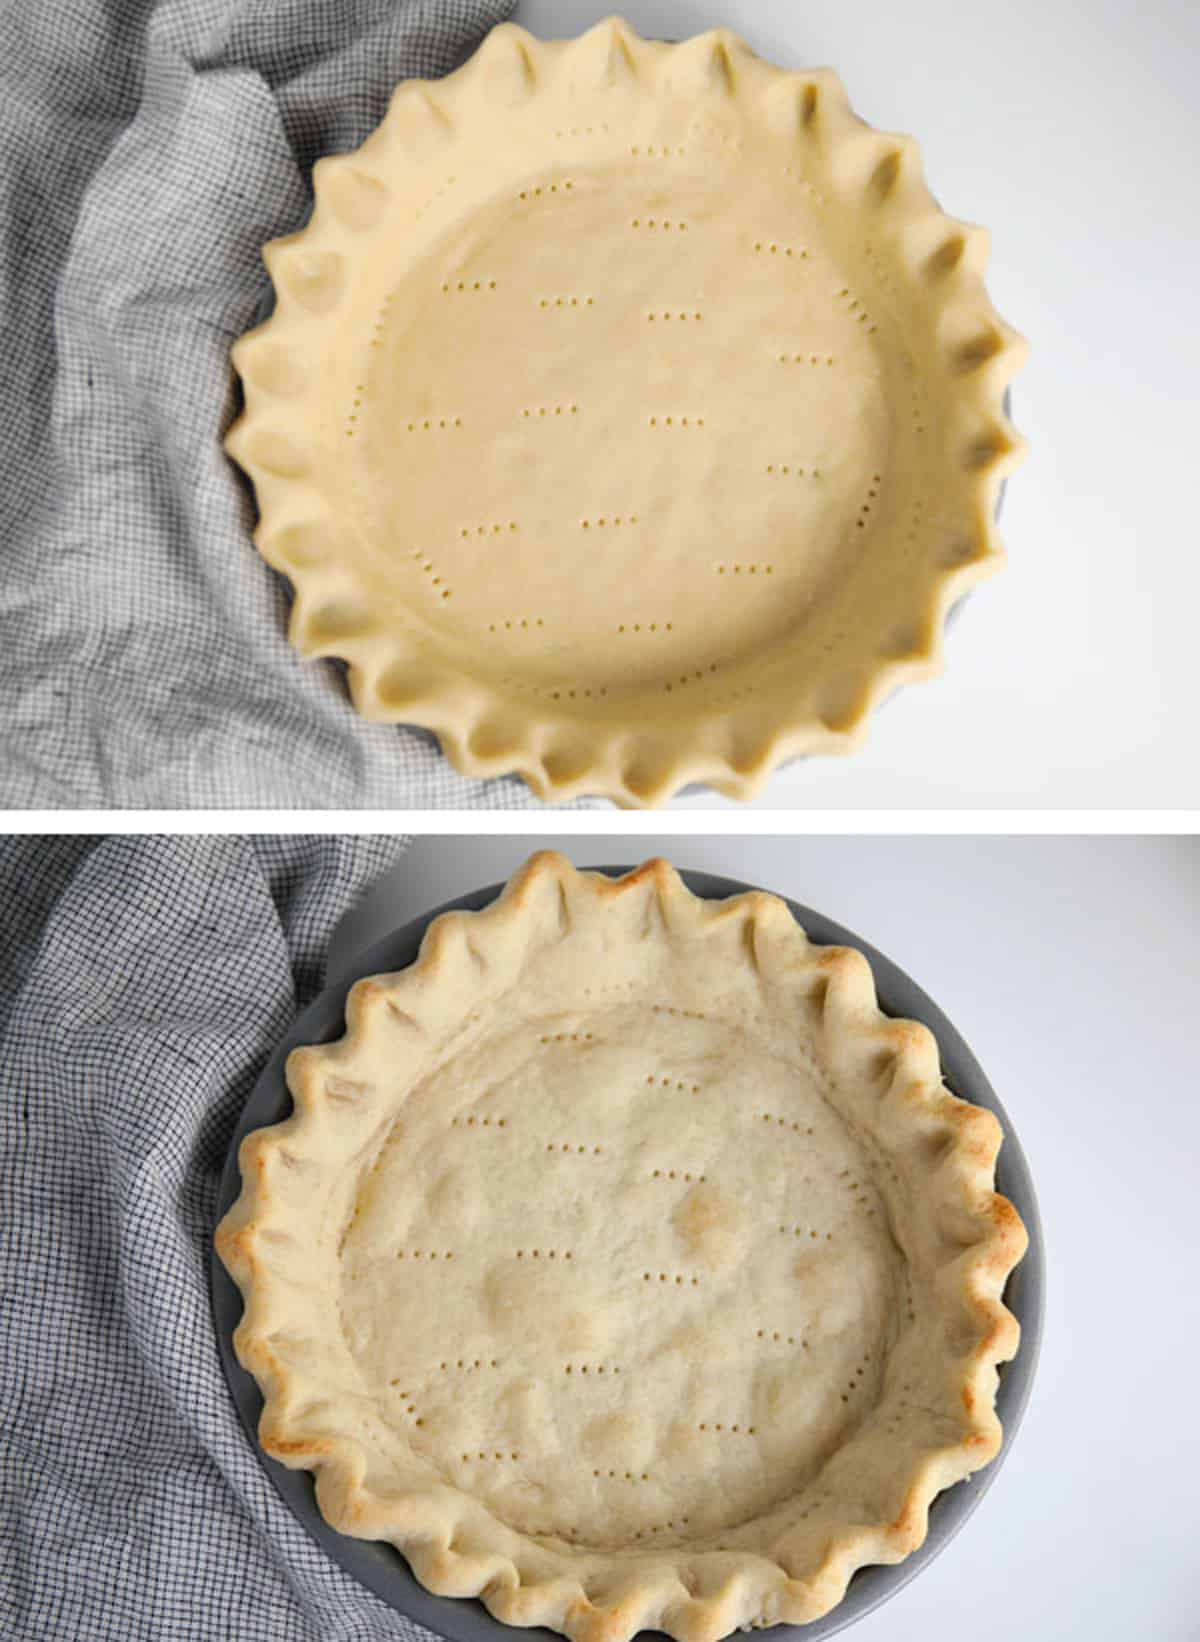 Homemade pie crust before and after baking in oven.